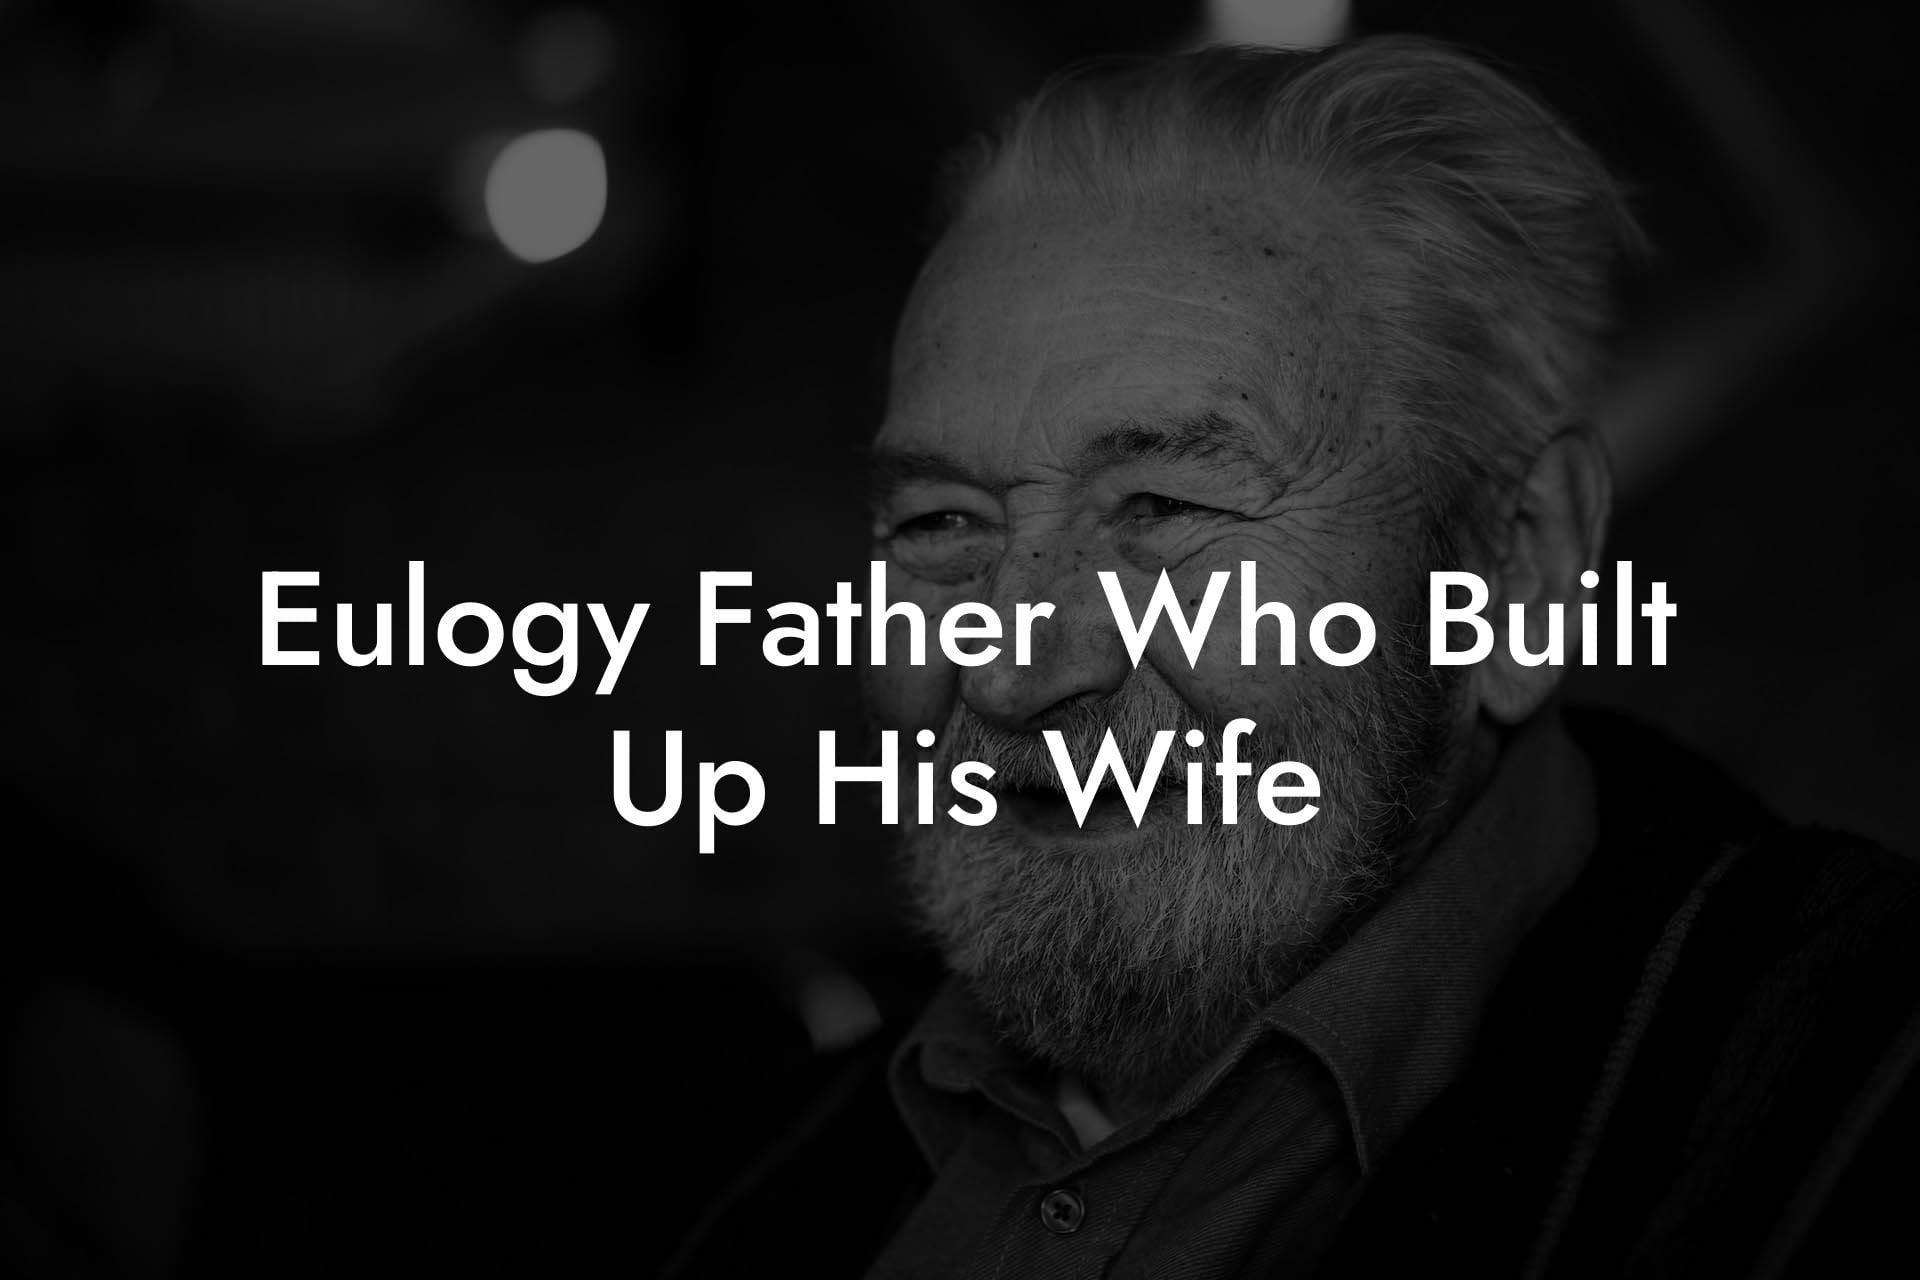 Eulogy Father Who Built Up His Wife